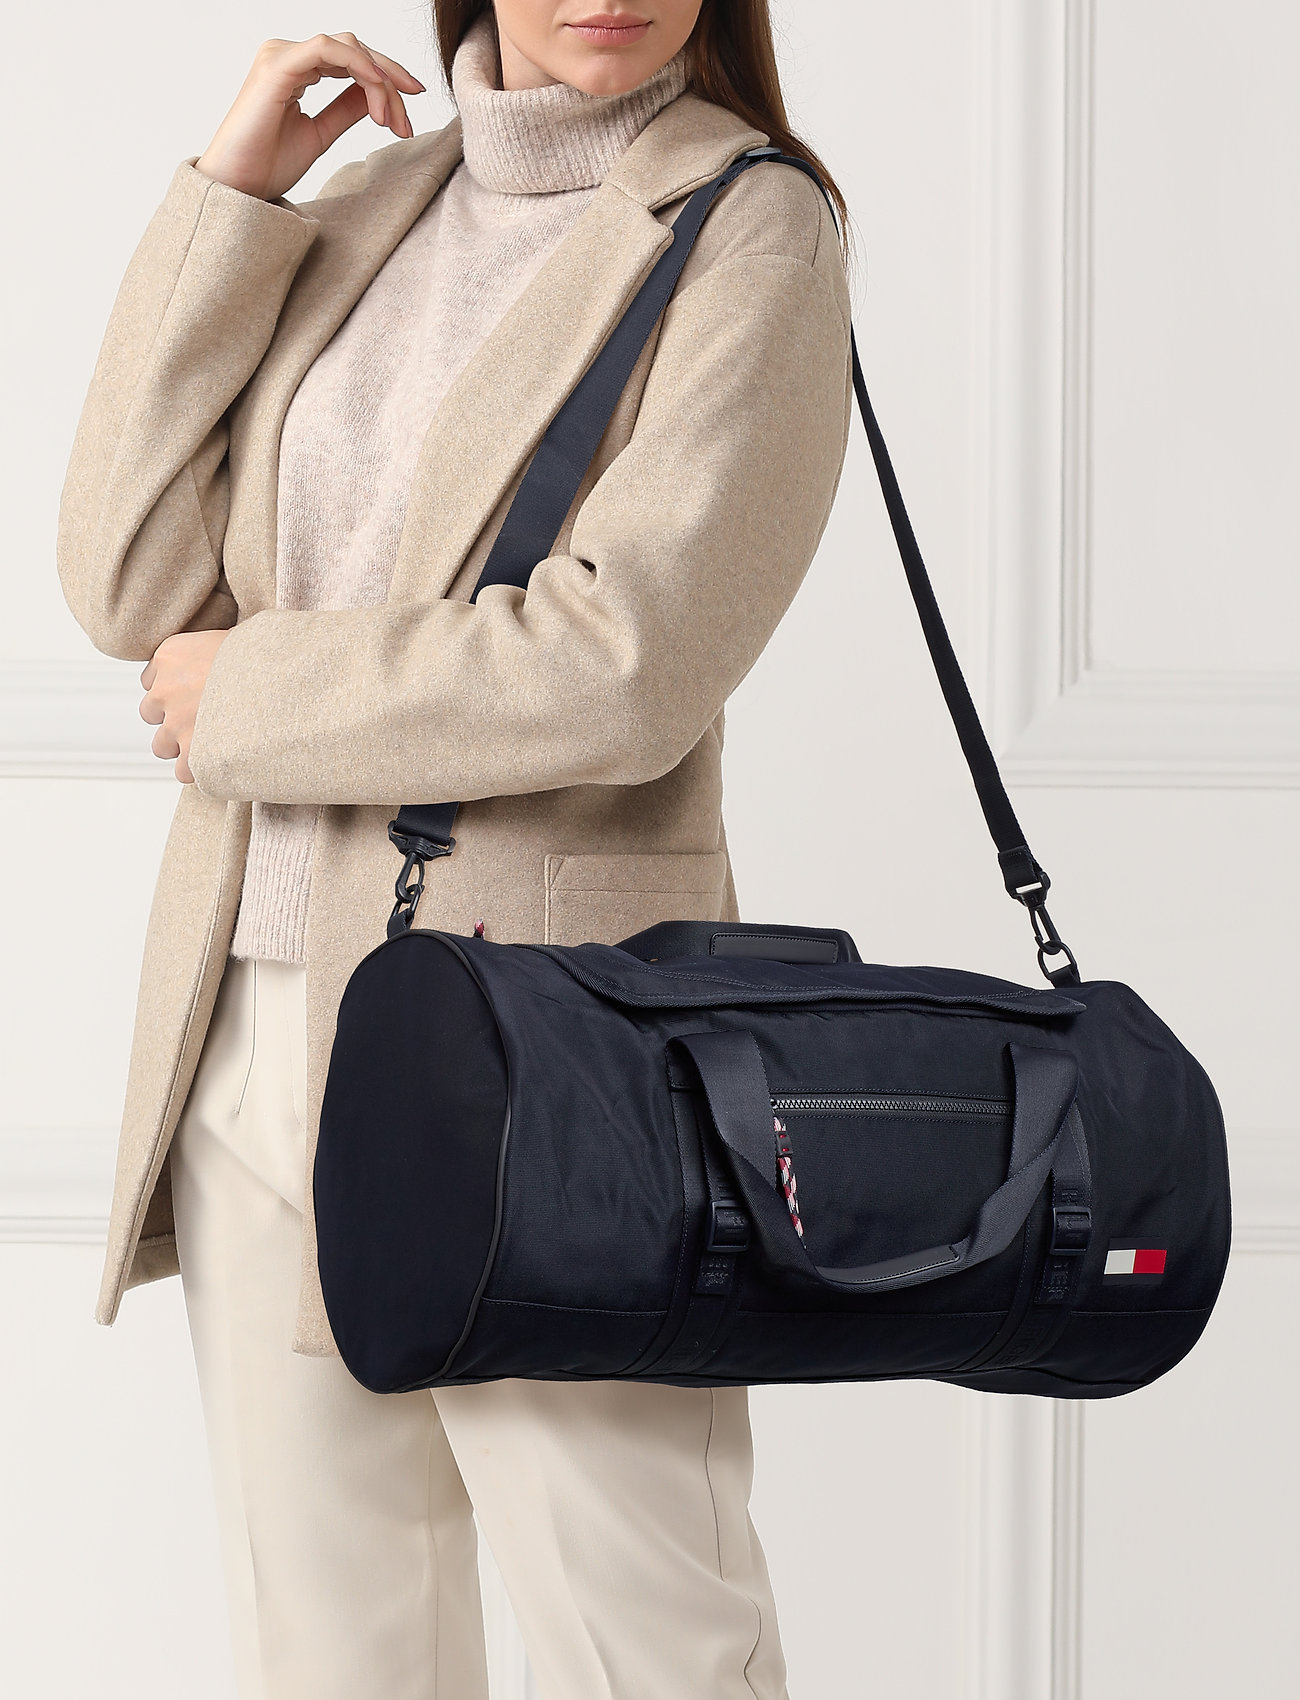 DESERT Tommy Hilfiger Tommy Duffle Bags Weekend & Gym Bags Blå Tommy Hilfiger weekendtasker for herre - Pashion.dk